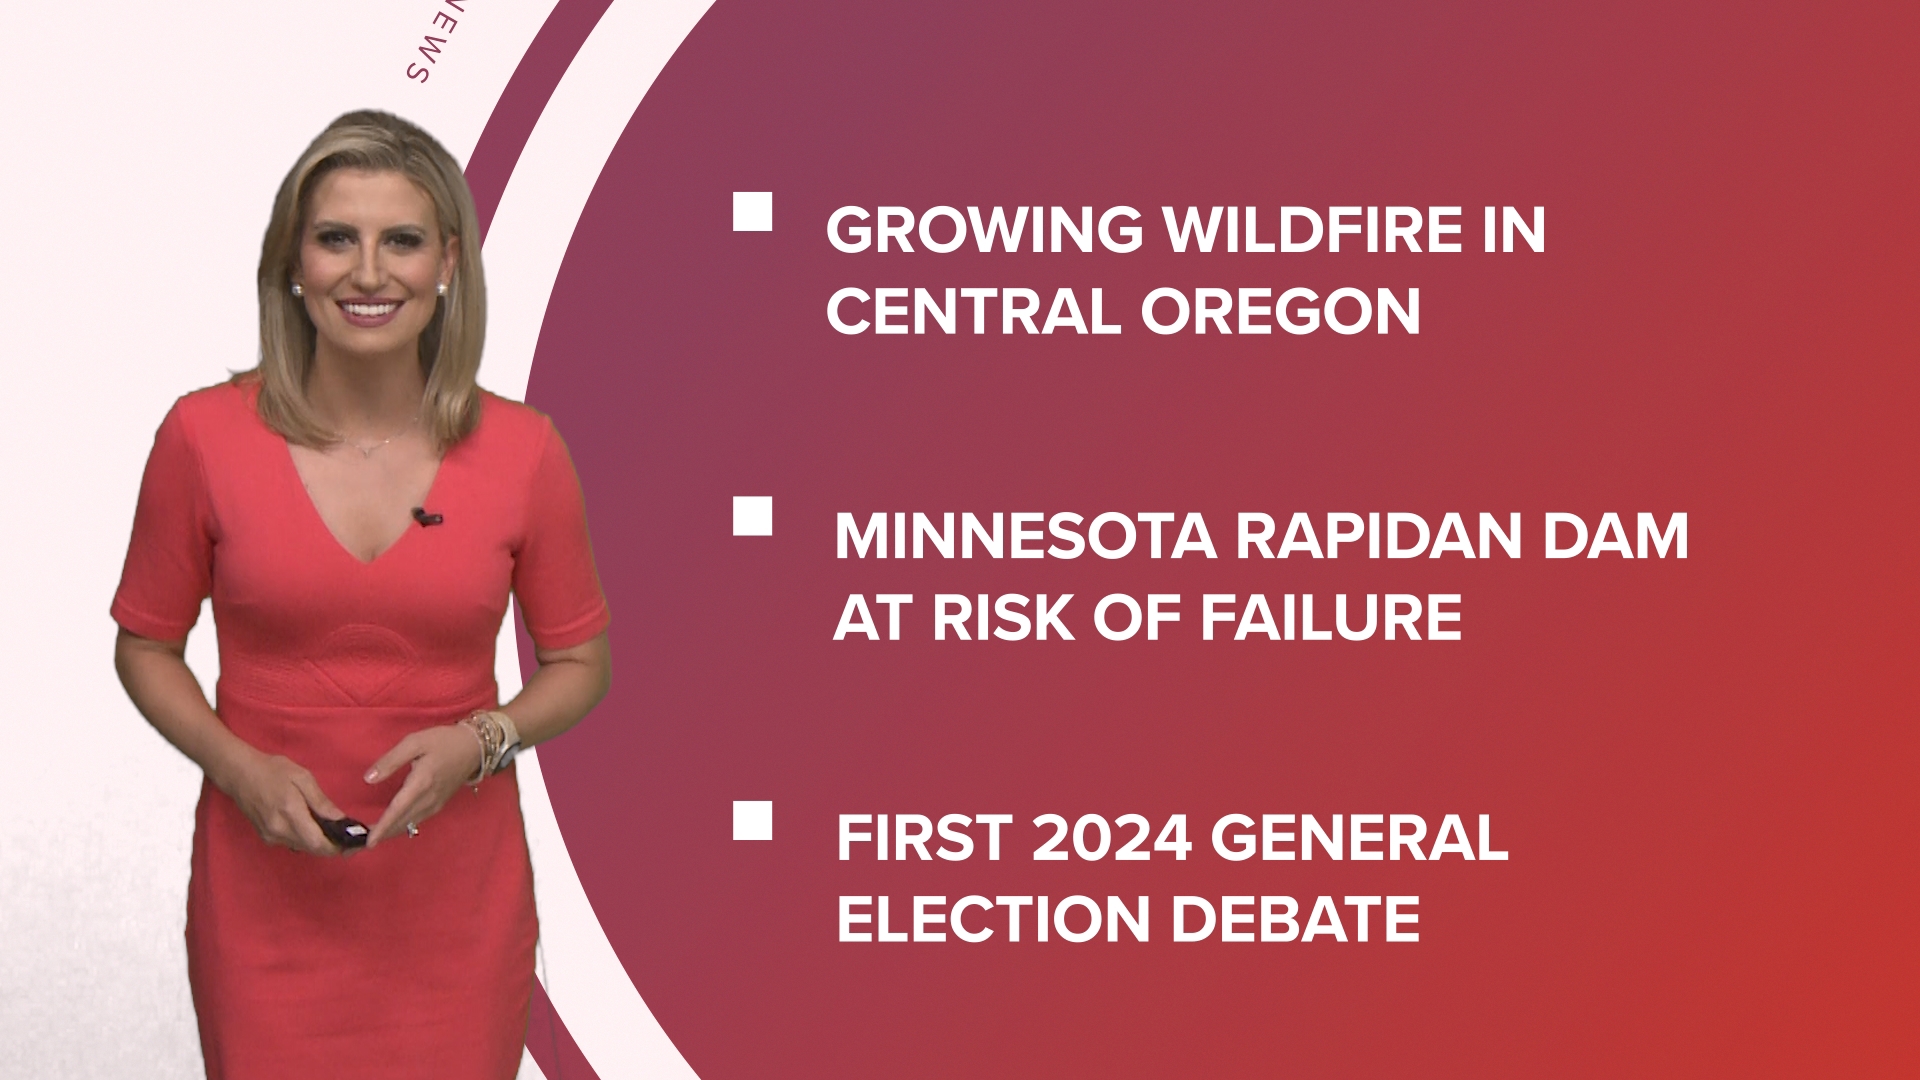 A look at what is happening in the news from a growing wildfire in Oregon to a Minnesota dam at risk of failure and trouble for student loan debt relief plan.